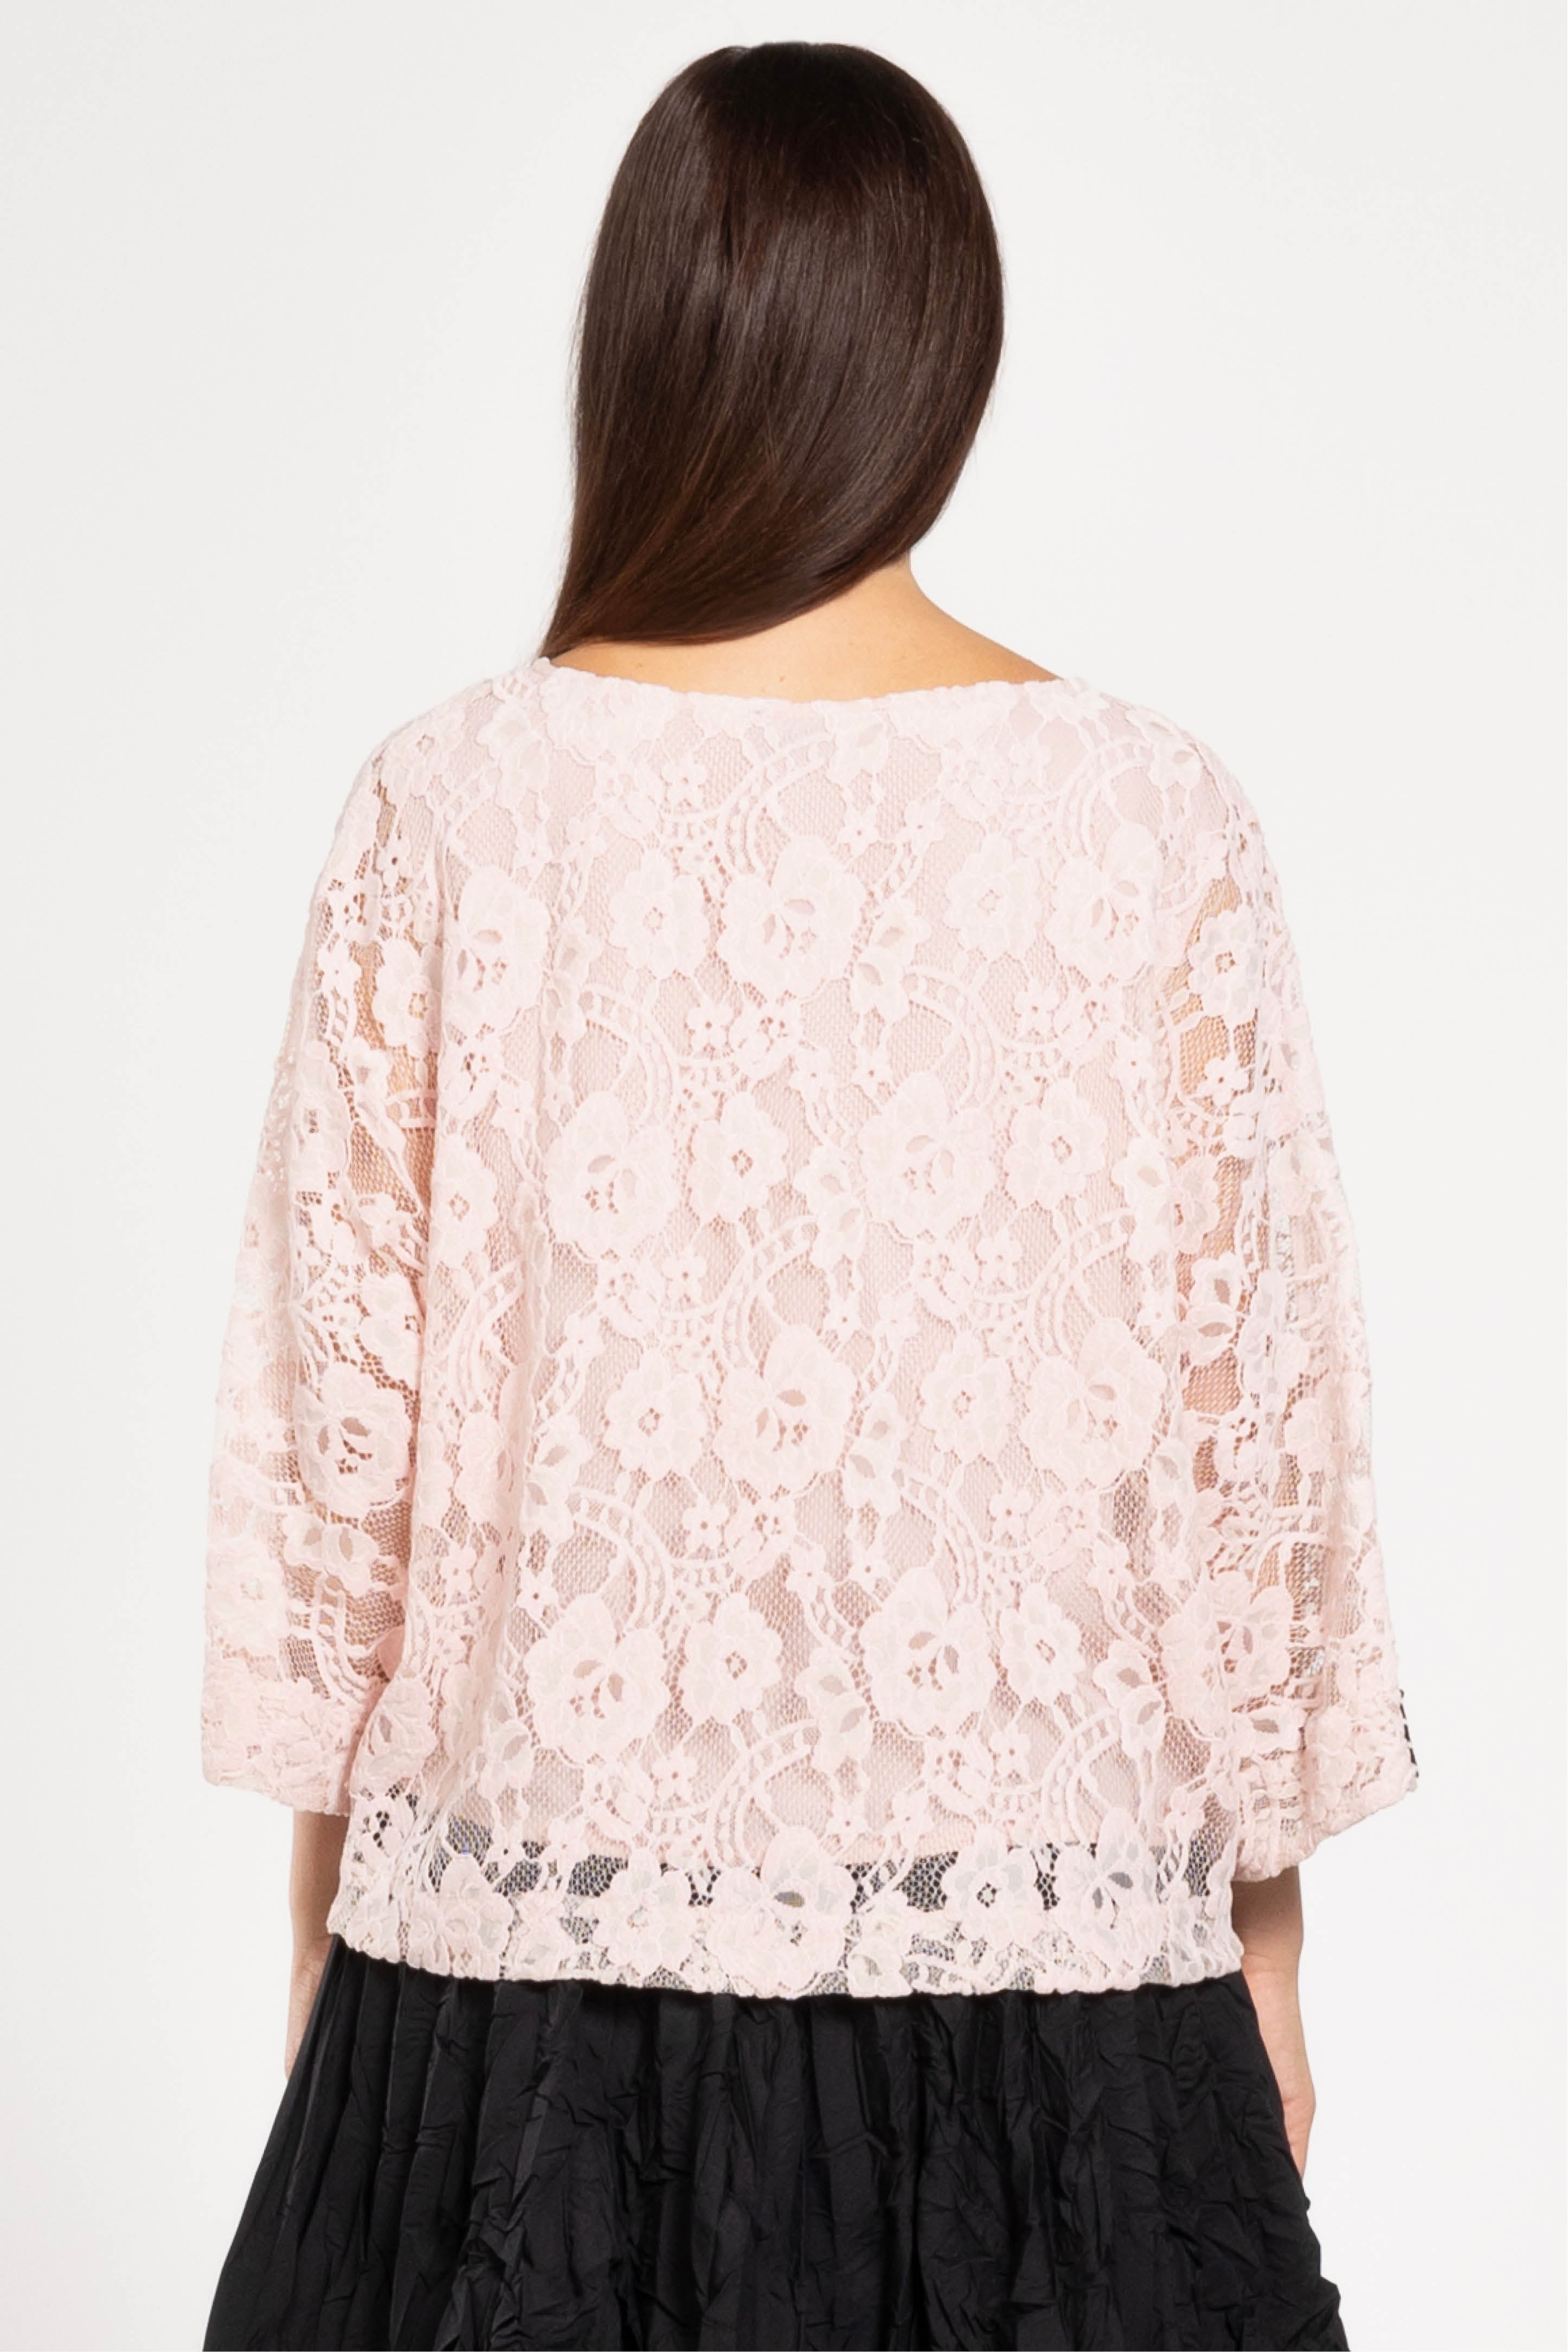 Lace Tops, Lace Tops Online NZ